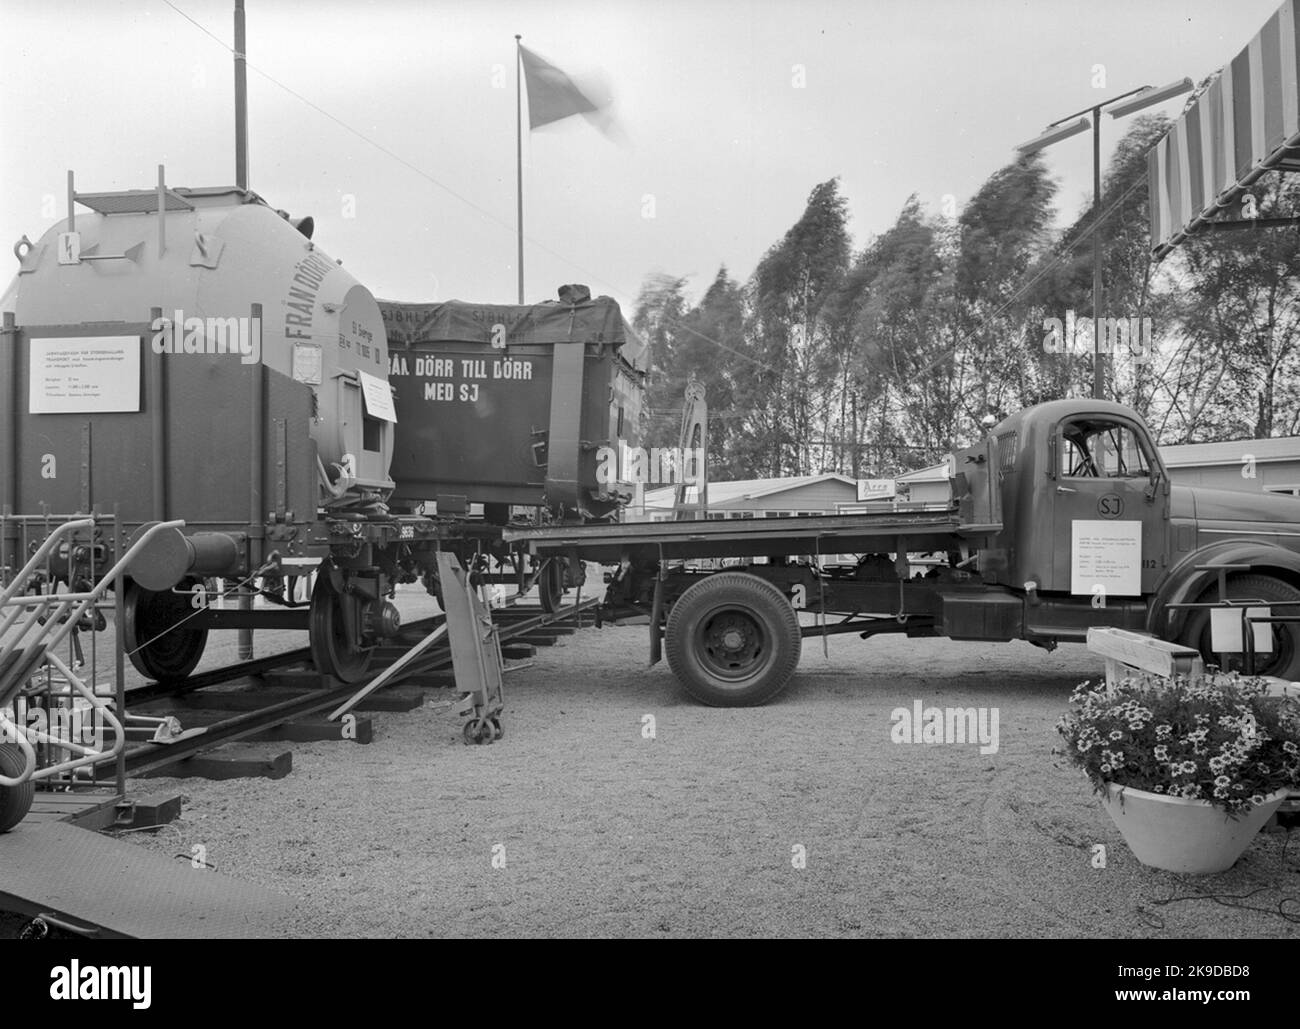 St. Eriksmässan 1954. Advertising from door to door with SJ. Loading of containers from freight wagon to truck. Stock Photo